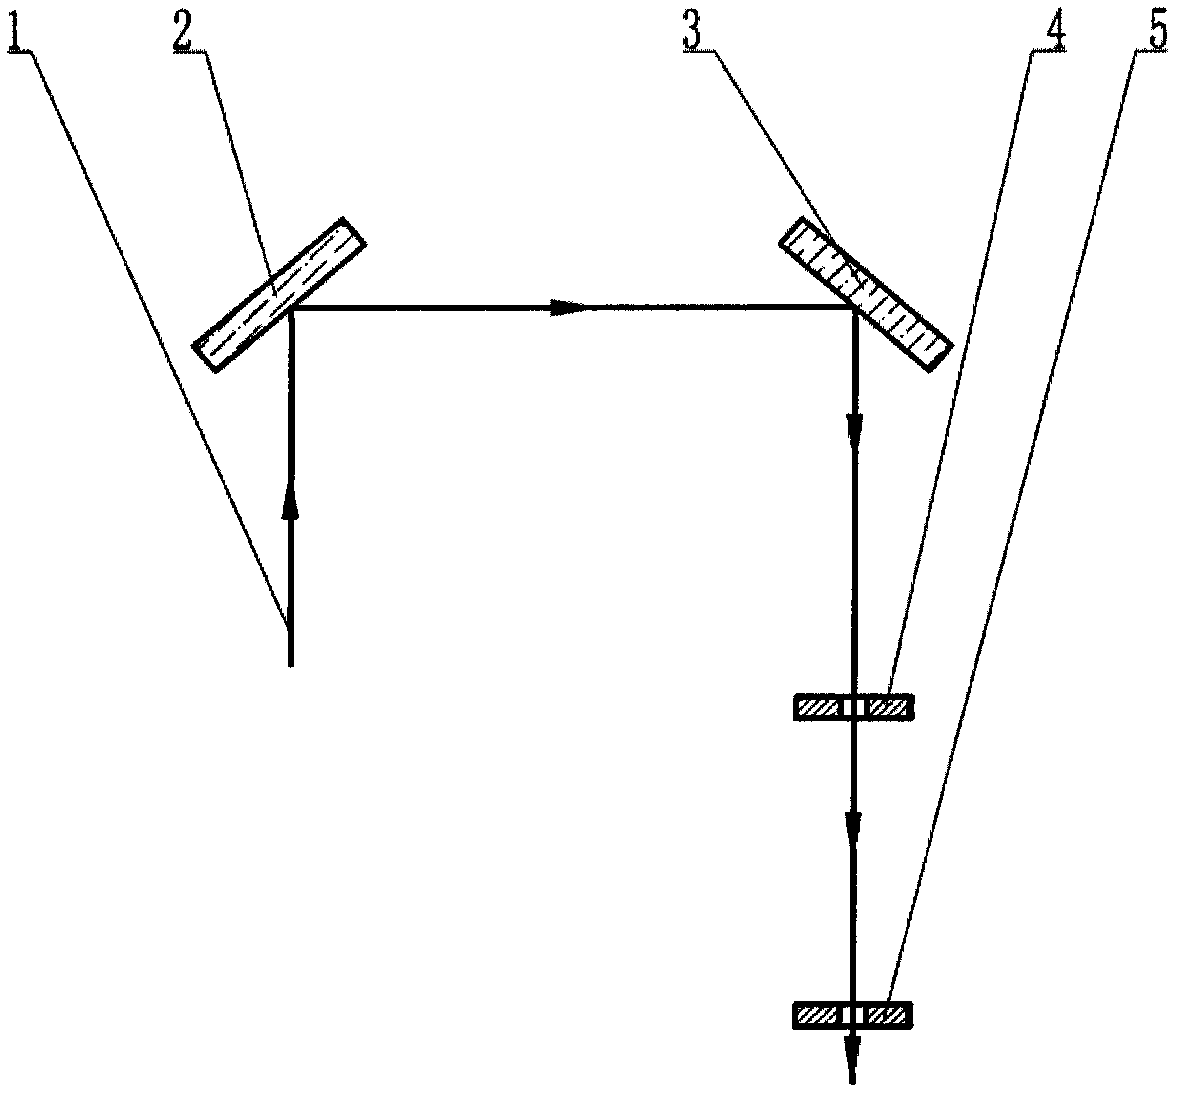 Method for precisely locating laser beam space